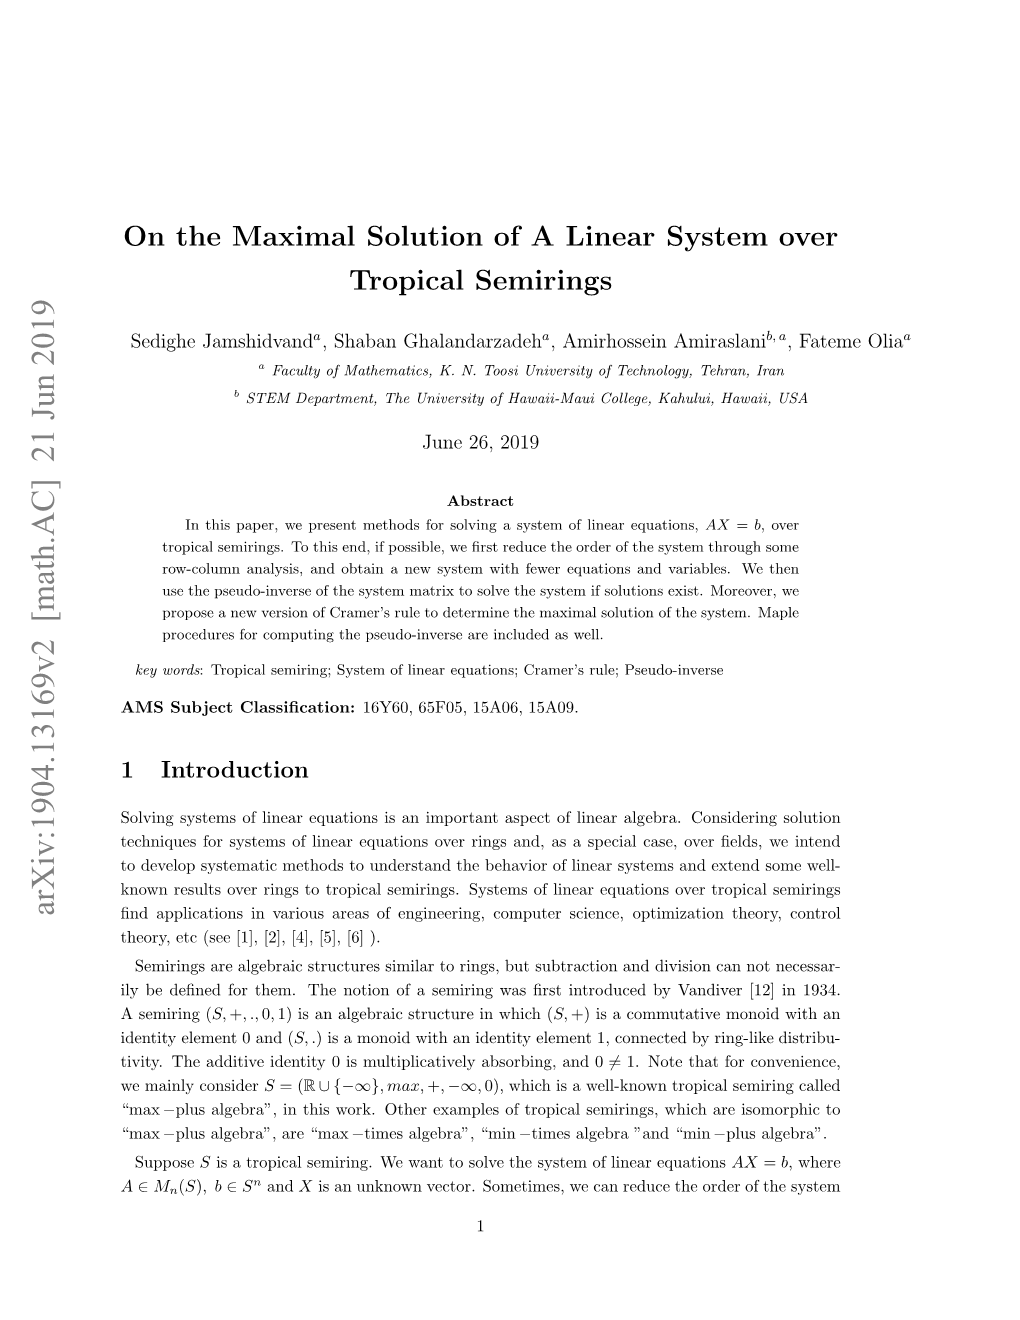 On the Maximal Solution of a Linear System Over Tropical Semirings